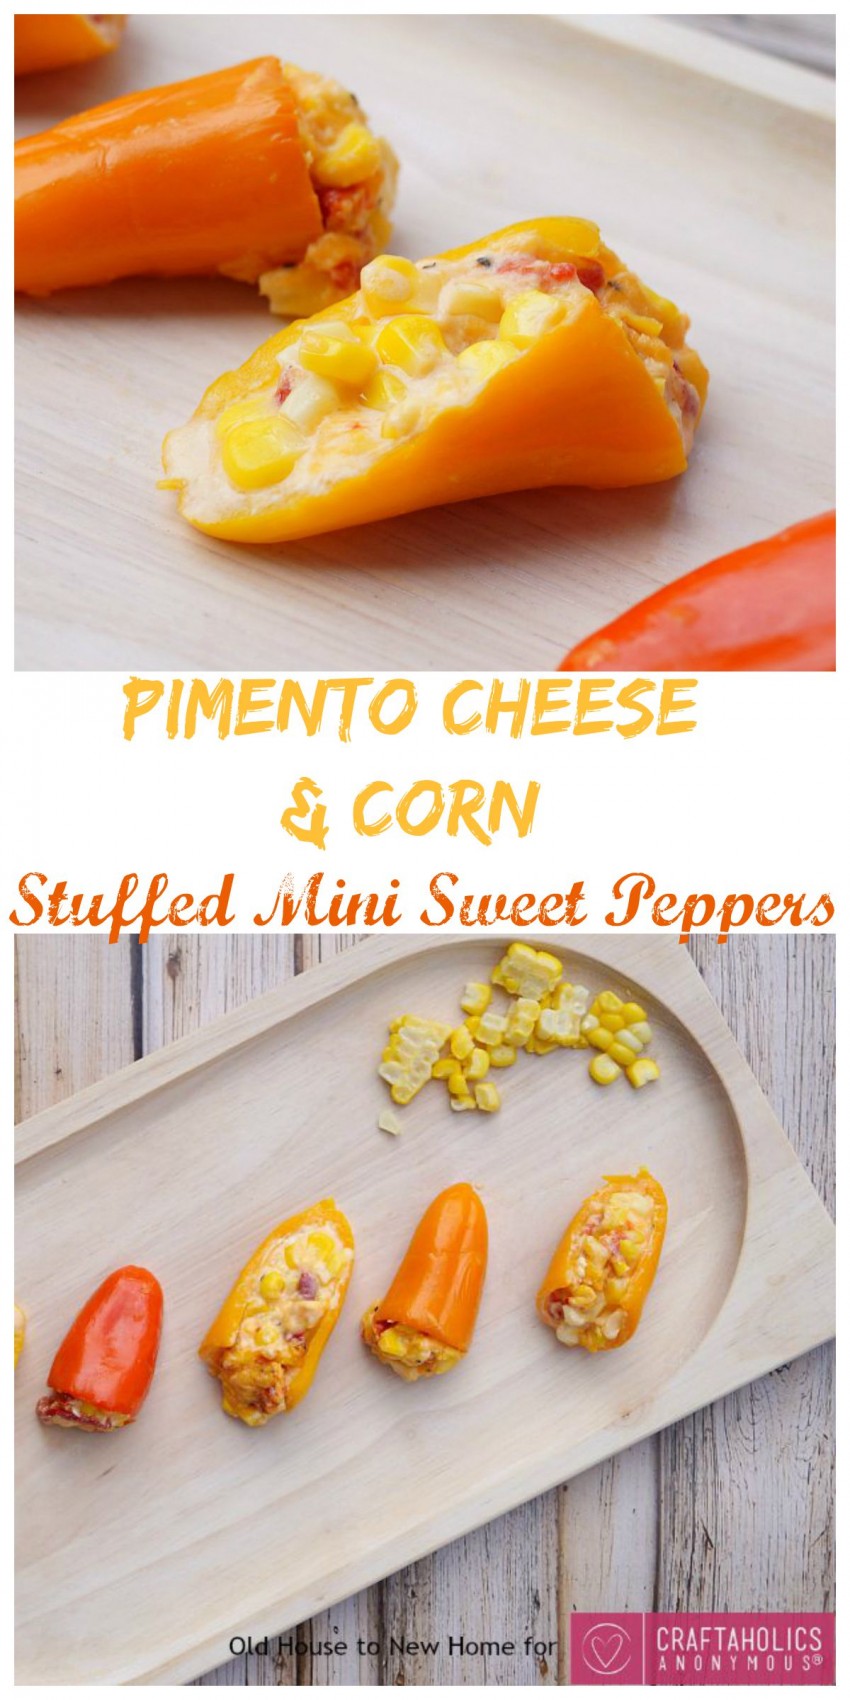 Pimento Cheese and Corn Stuffed Mini Sweet Peppers! A delicious and easy appetizer for football season! | Craftaholics Anonymous®